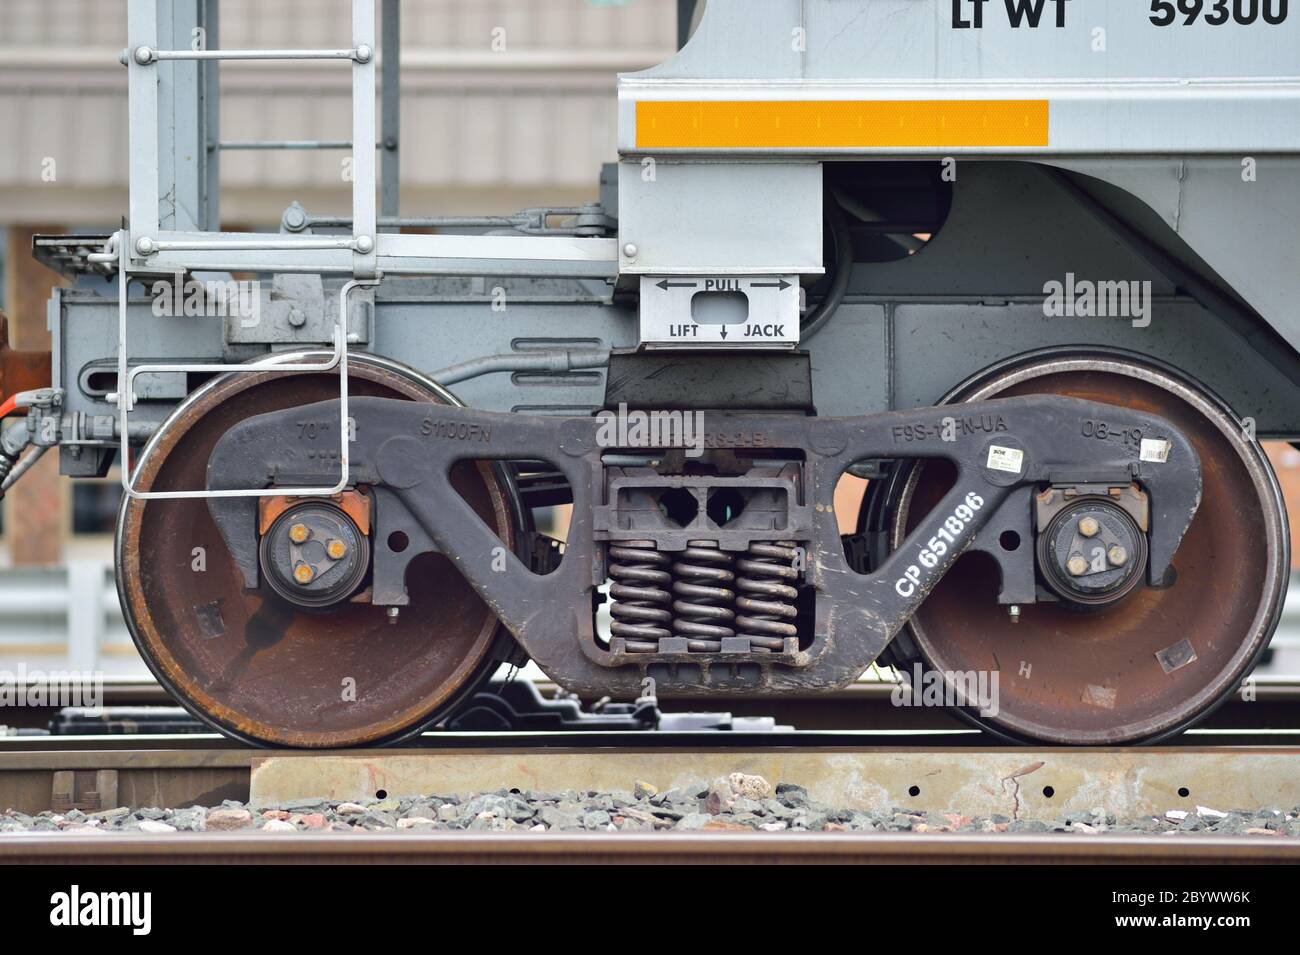 Franklin Park, Illinois, USA. A standard AAR set of wheels or trucks that support freight cars used on North American railroads. Stock Photo